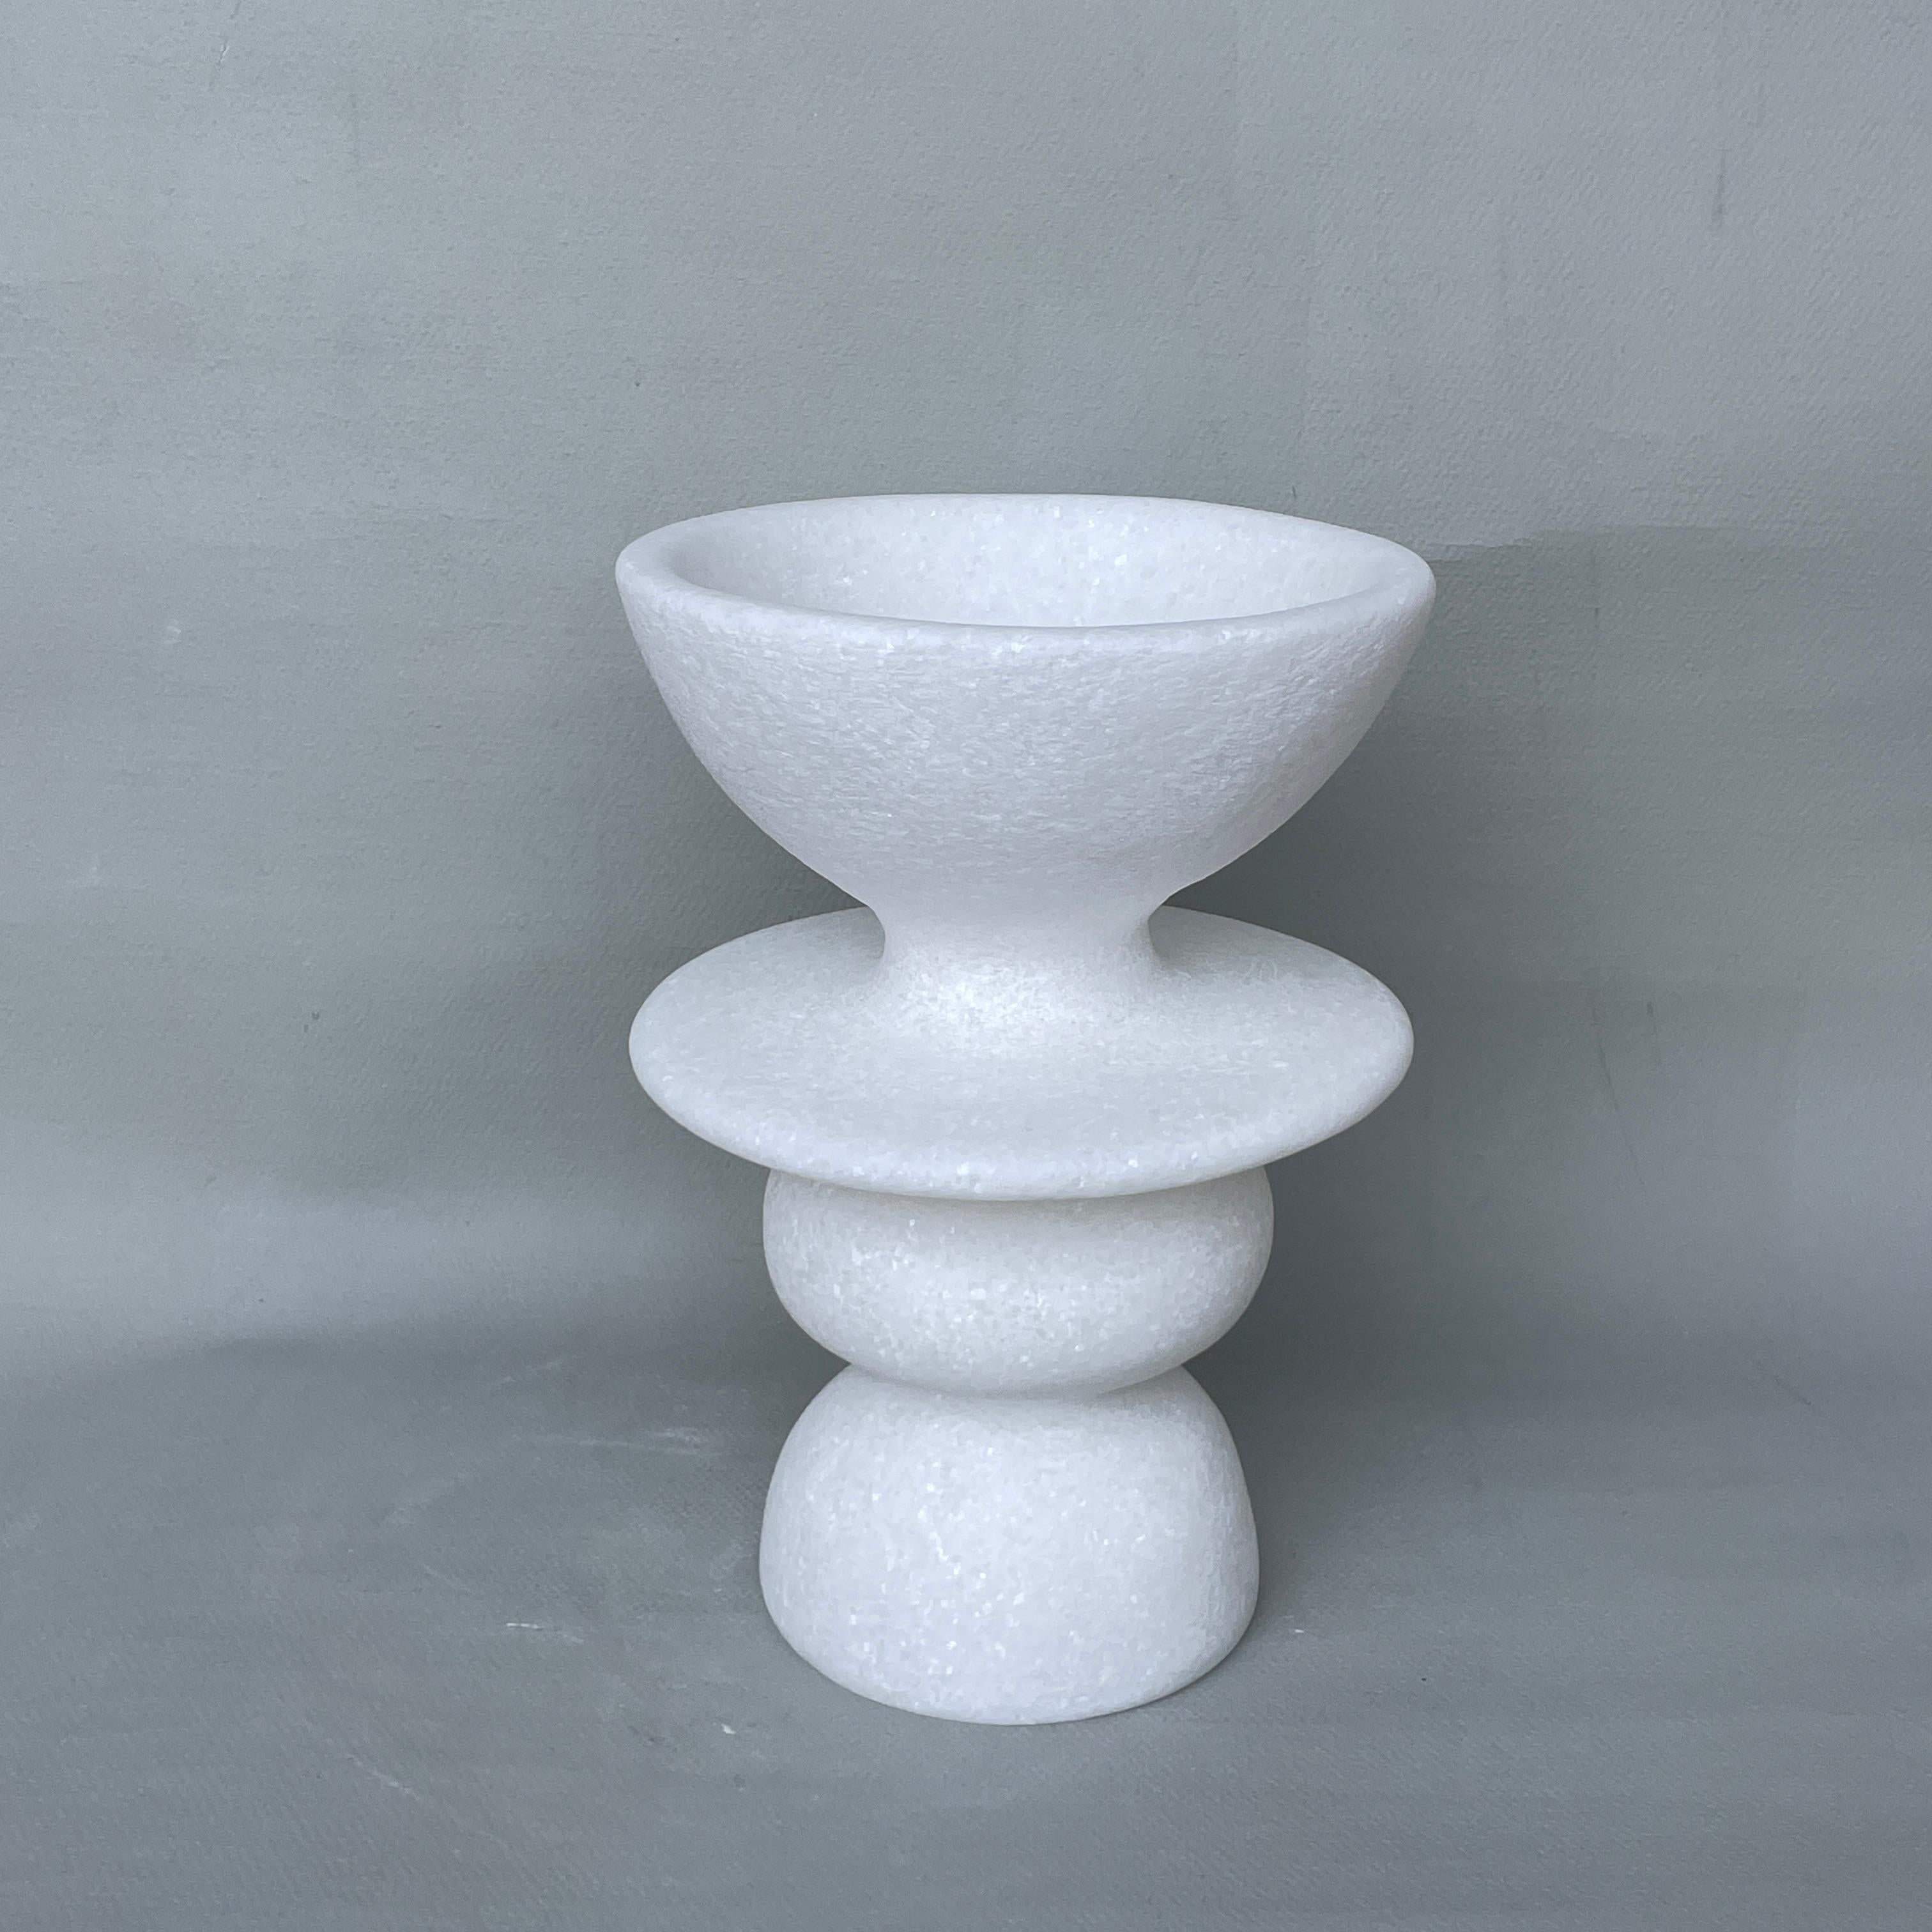 Unique Naxian Marble Vessel by Tom Von Kaenel
Unique piece.
Dimensions: Ø 15.5 x H 22 cm.
Materials: Naxian marble.

The surfaces of the objects are not sealed, they are not protected against acid. The lines of the handcraft are visible it